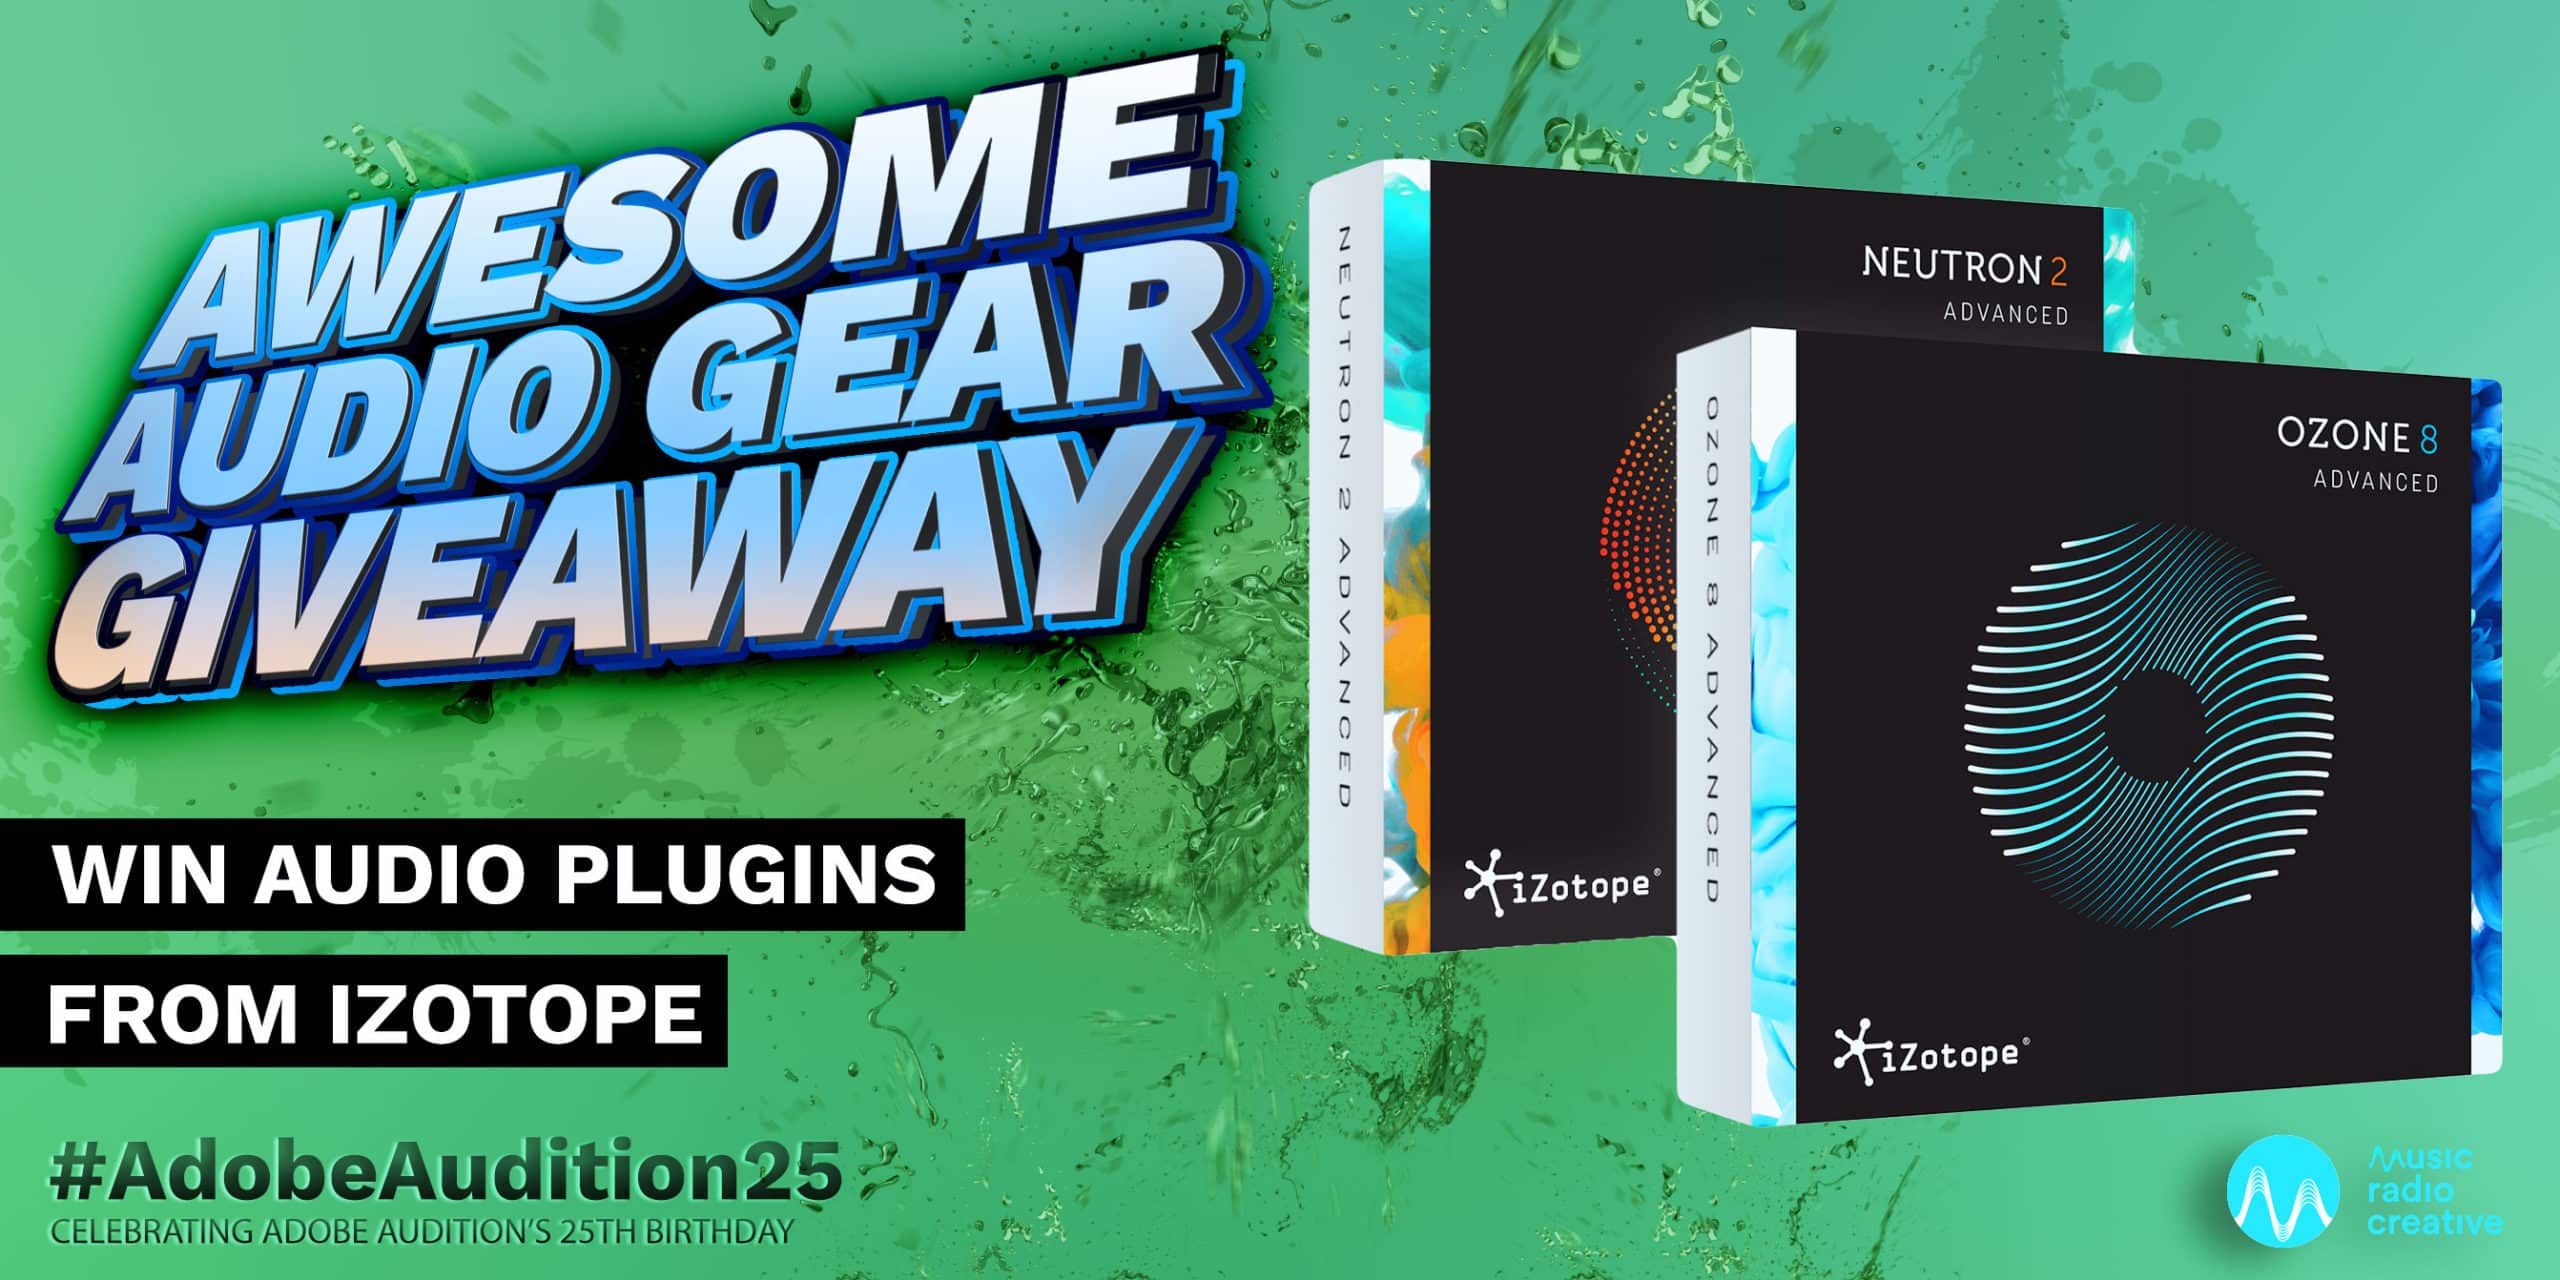 Win Audio Plugins from iZotope Awesome Audio Gear Giveaway  Music Radio Creative